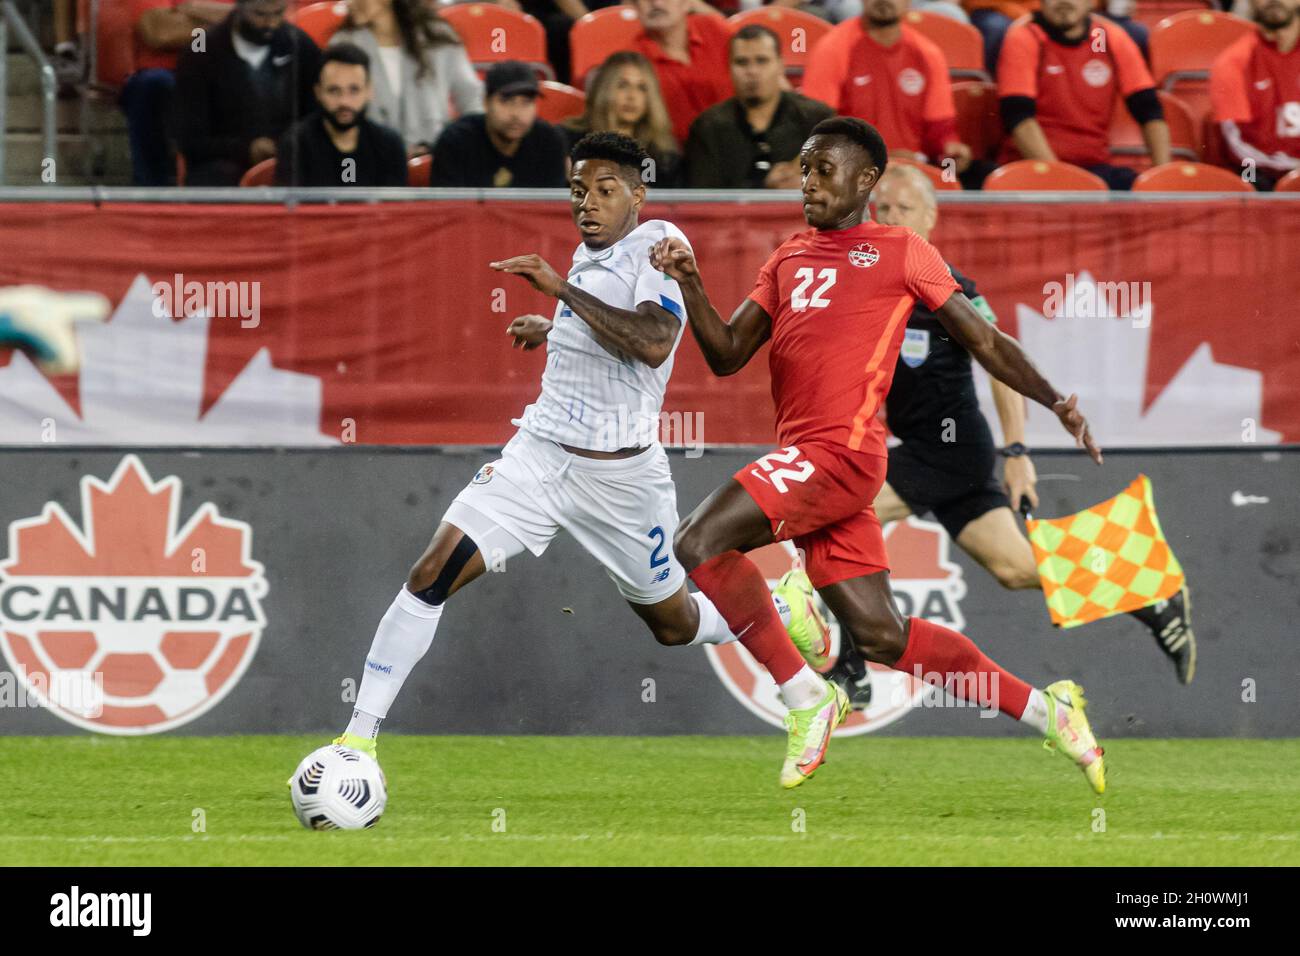 Toronto, Canada, October 13, 2021: Richie Laryea, No.22, of Team Canada competes for the ball against Cesar Blackman, No.2, of Team Panama during the CONCACAF FIFA World Cup Qualifying 2022 match at BMO Field in Toronto, Canada. Canada won the match 4-1. Credit: Phamai Techaphan/Alamy Live News Stock Photo